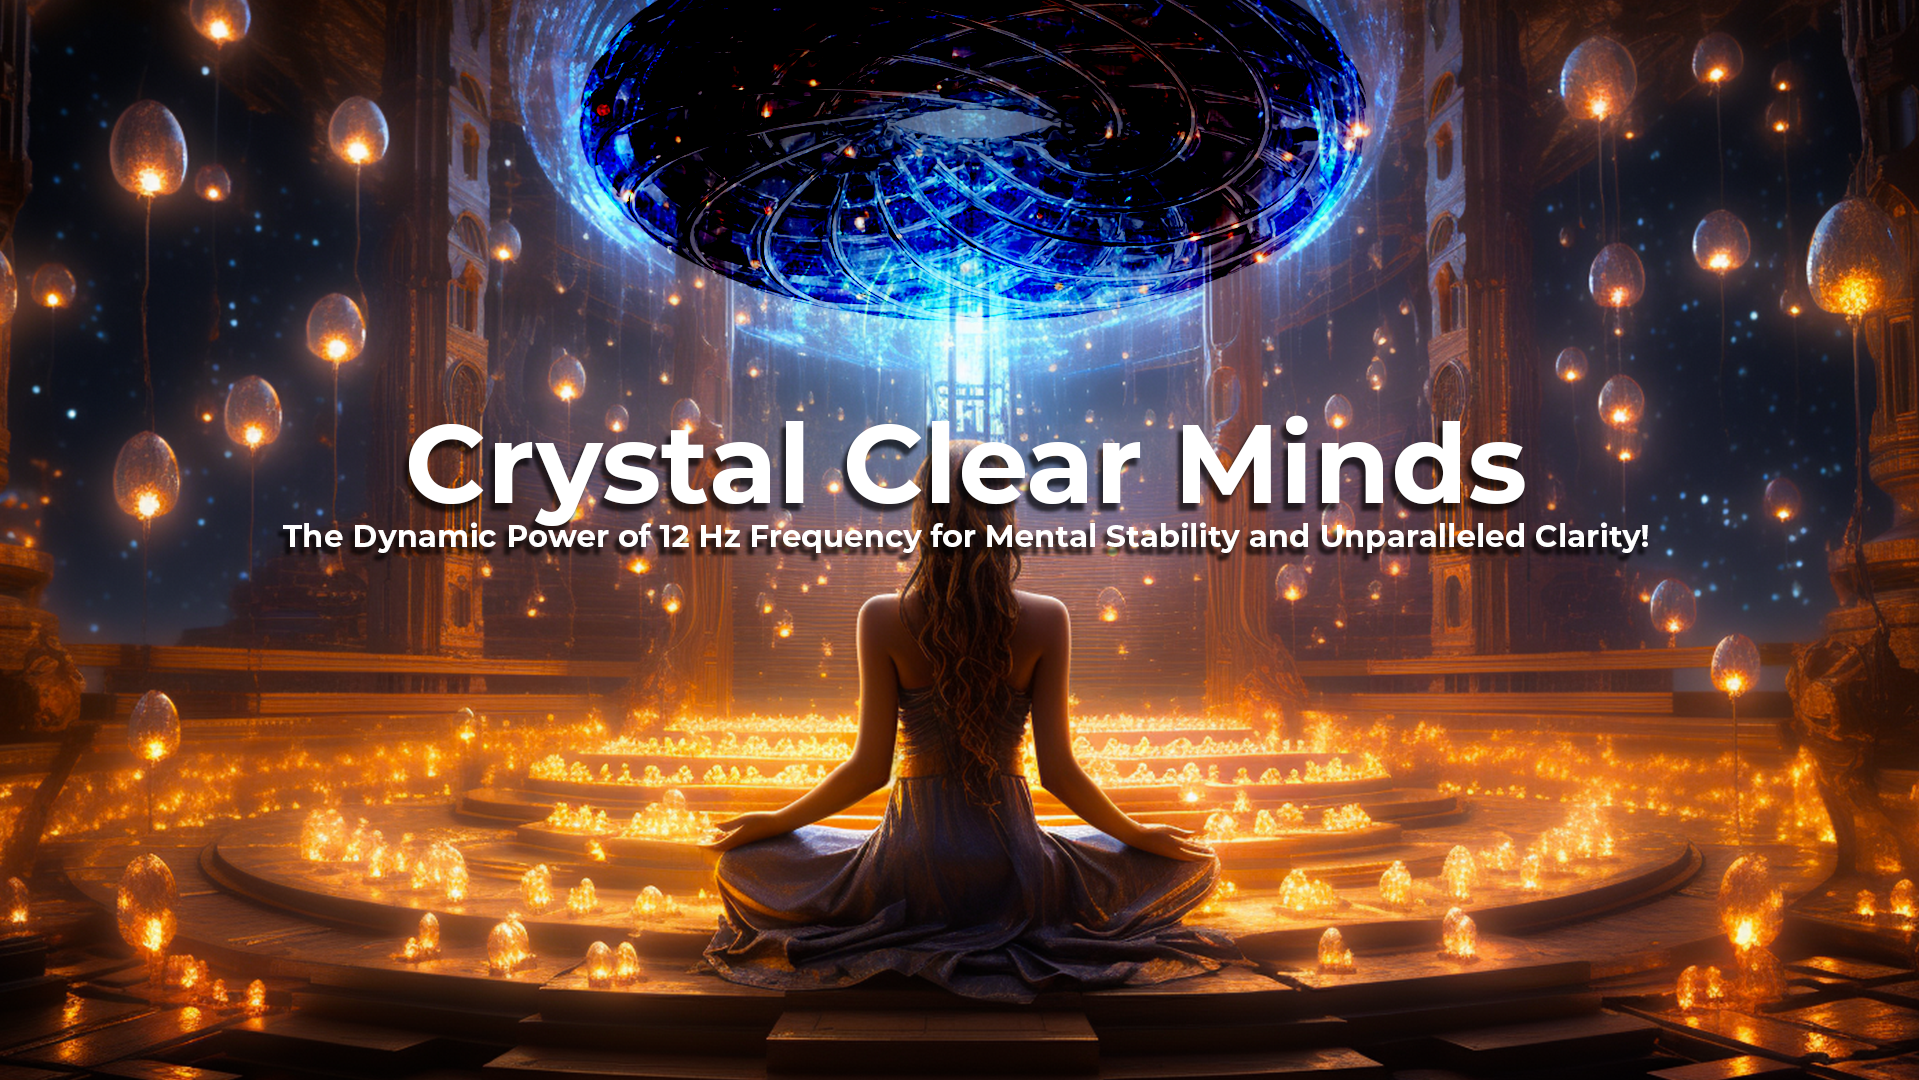 Crystal Clear Minds: The Dynamic Power of 12 Hz Frequency for Mental Stability and Unparalleled Clarity